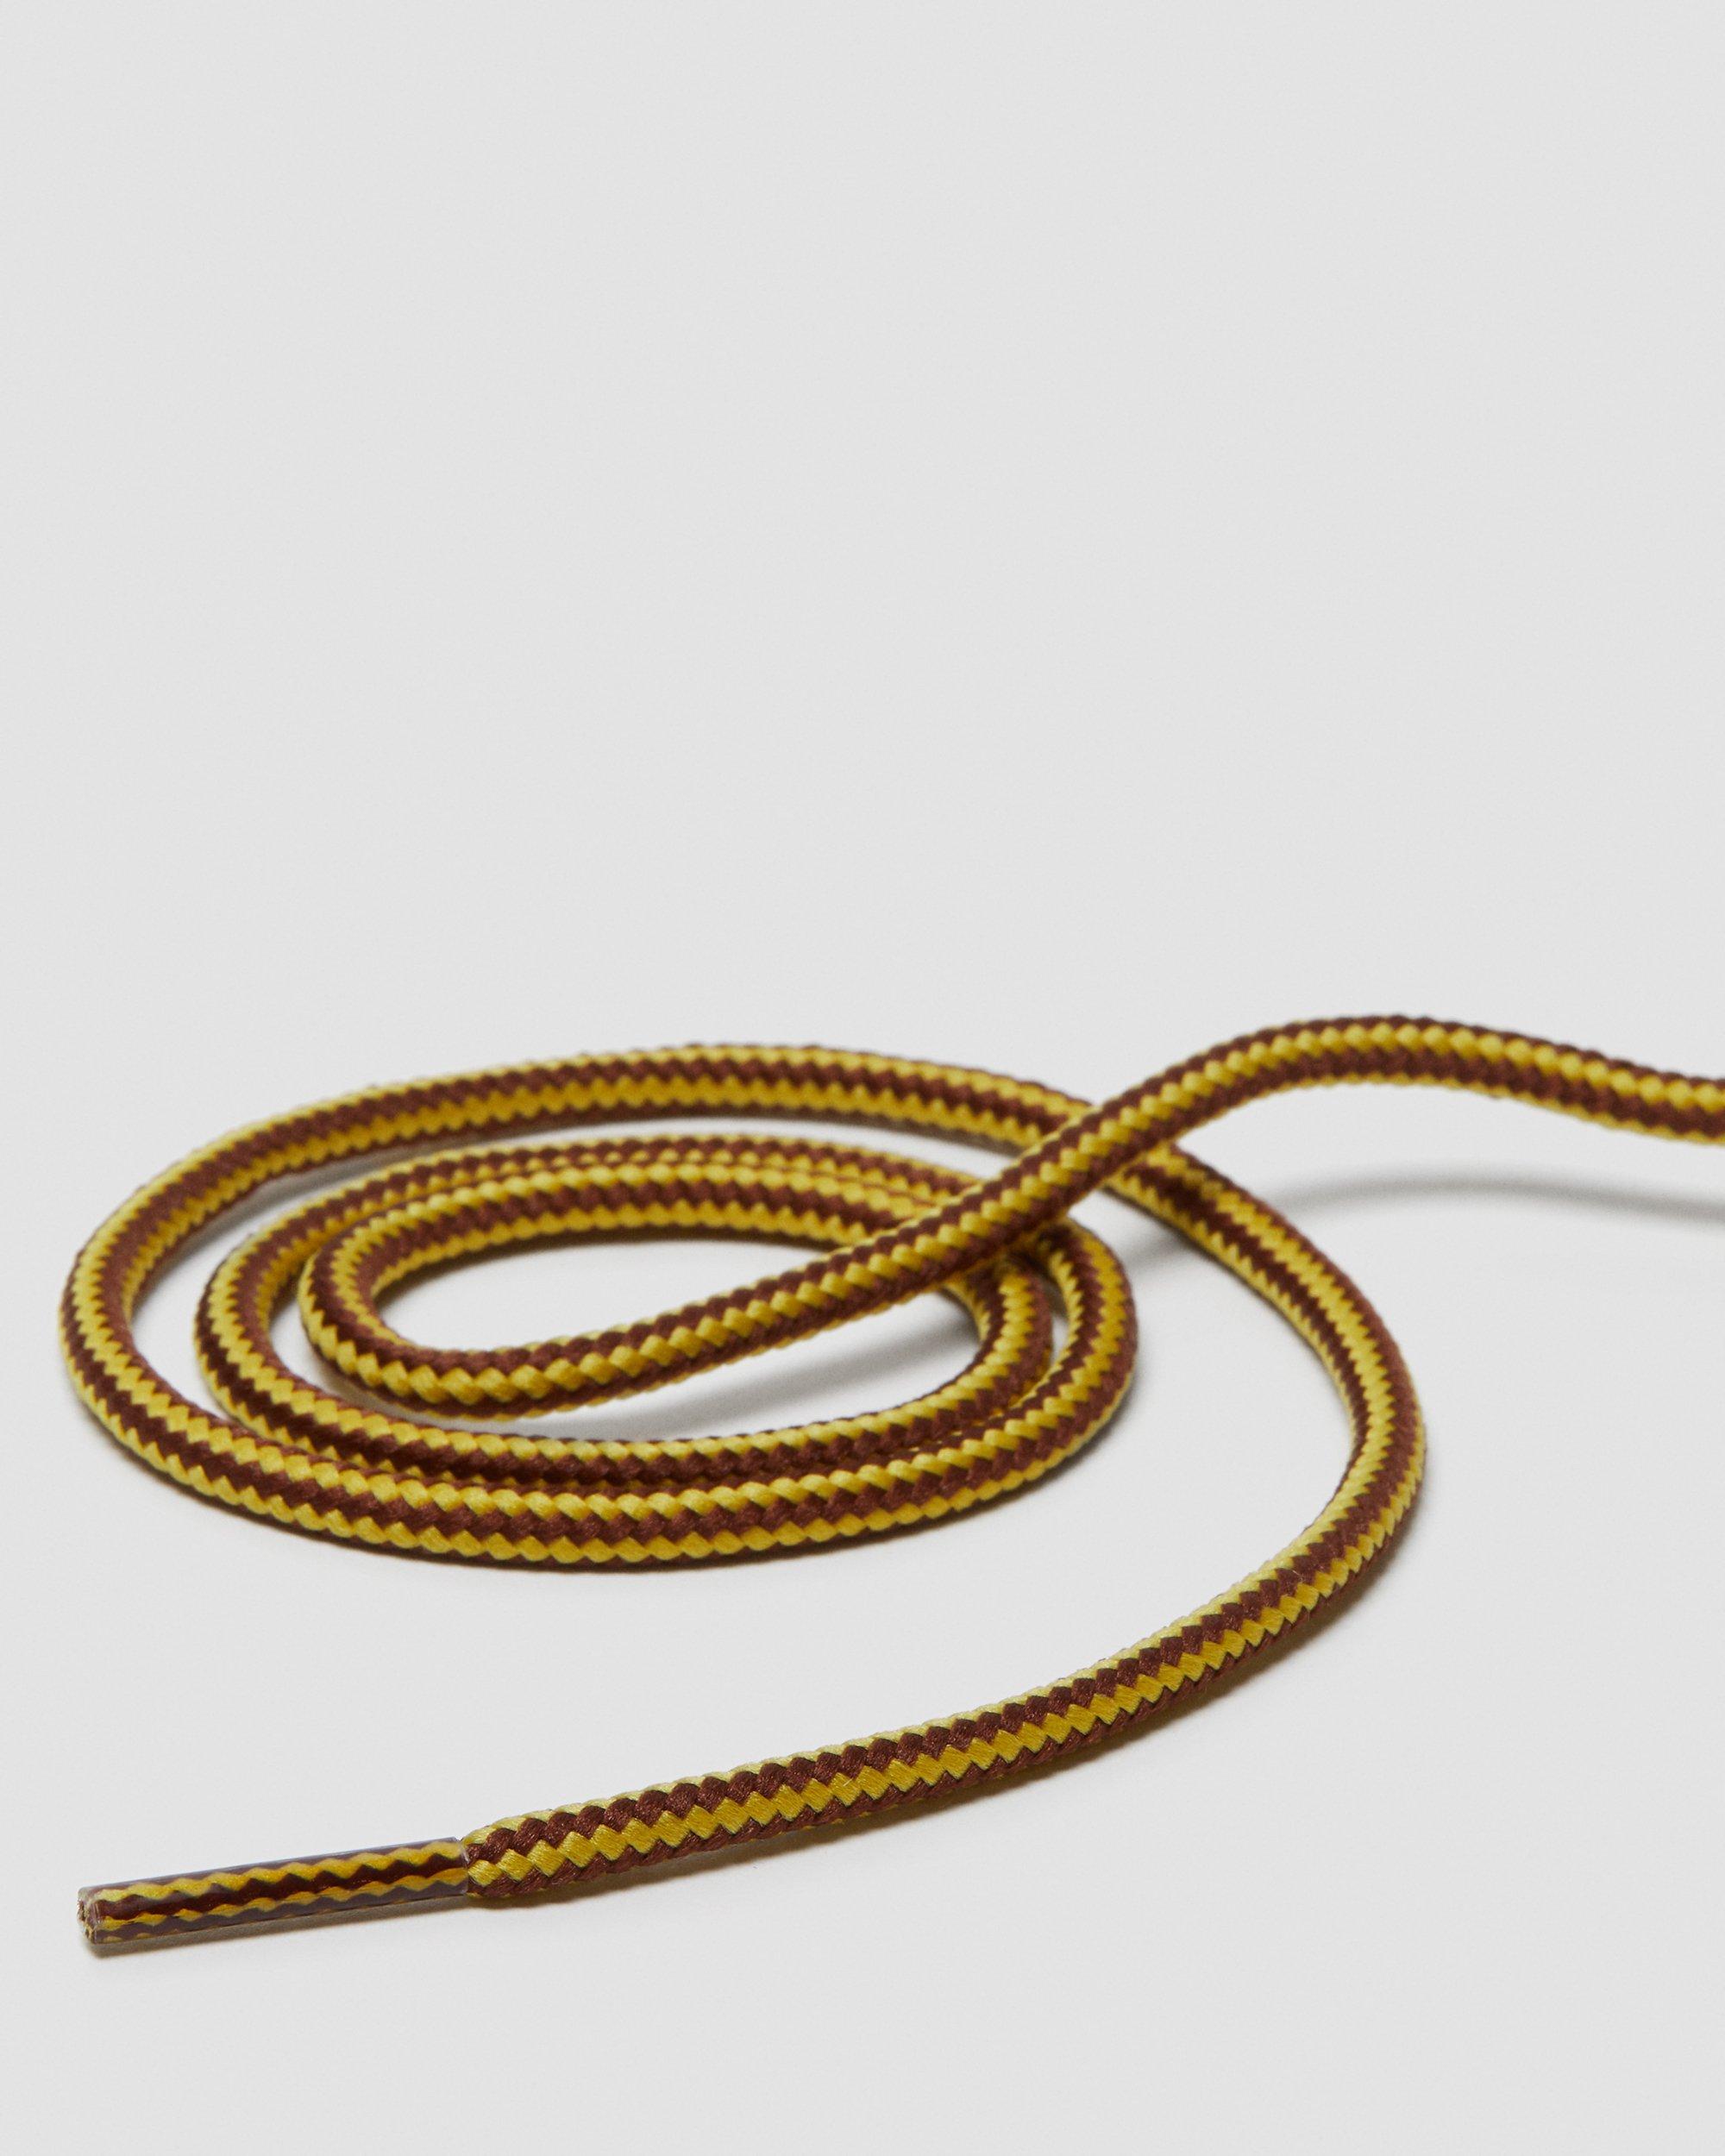 65cm Round Shoe Laces (3 Eye) in Brown+Yellow